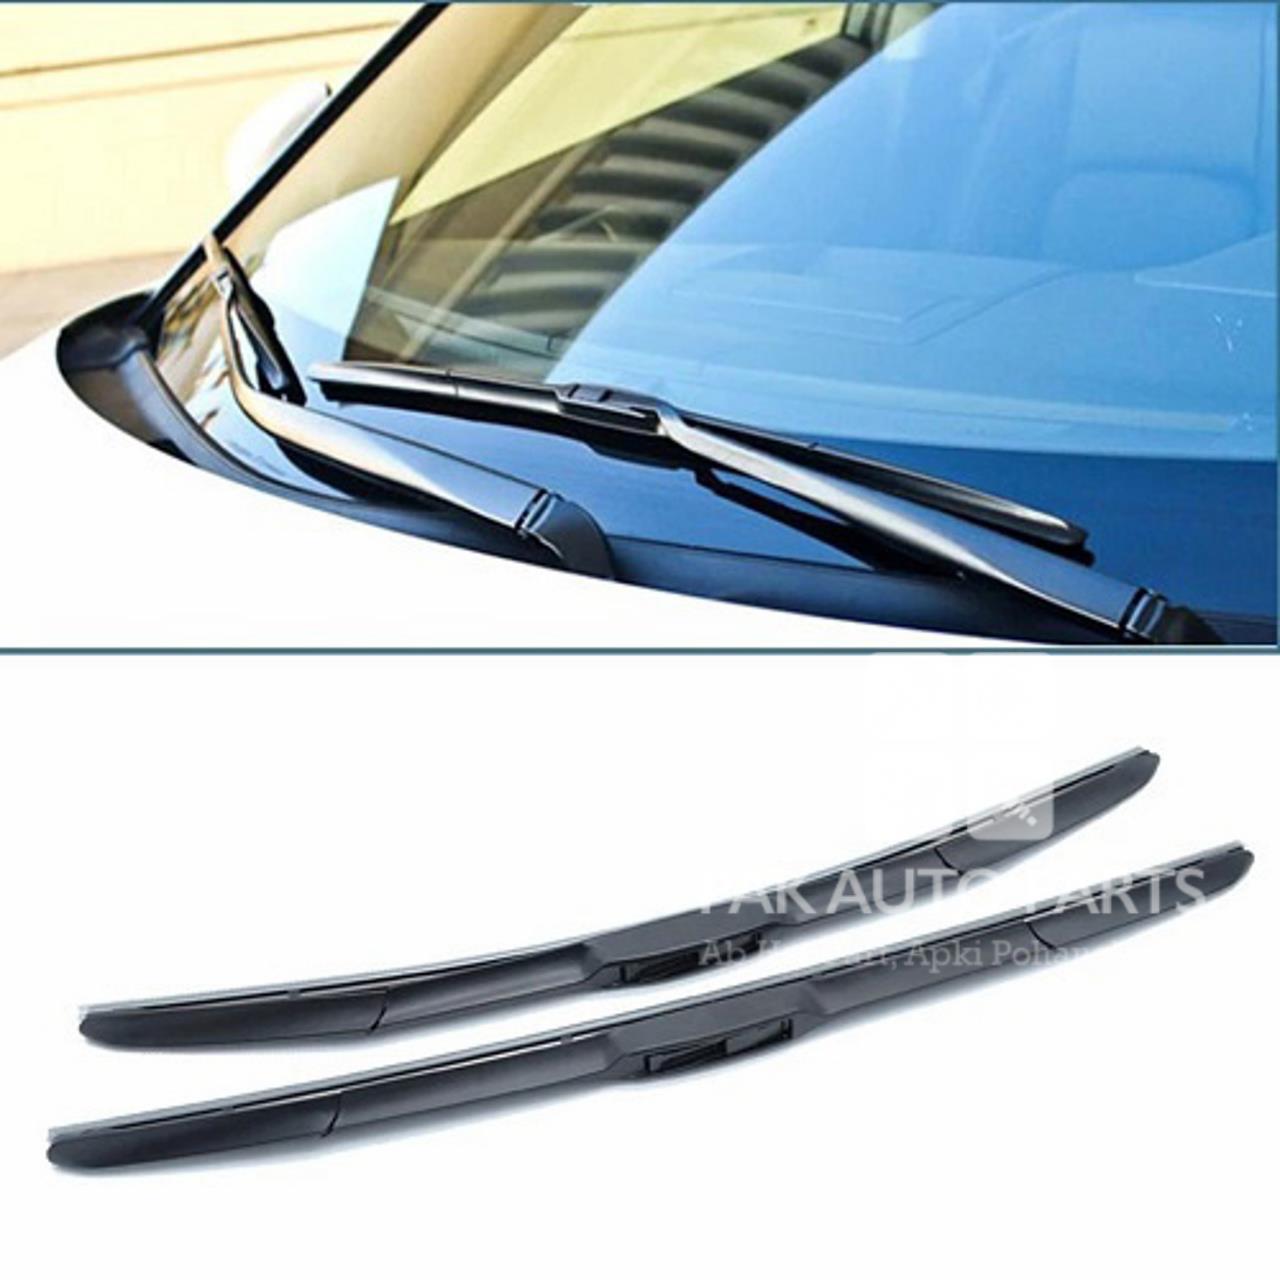 Picture of Alto 2002-2015 | Hybrid Wiper Blades | 17+17 Inches | Non-Scratch able | Black Lead Coated Rubber.